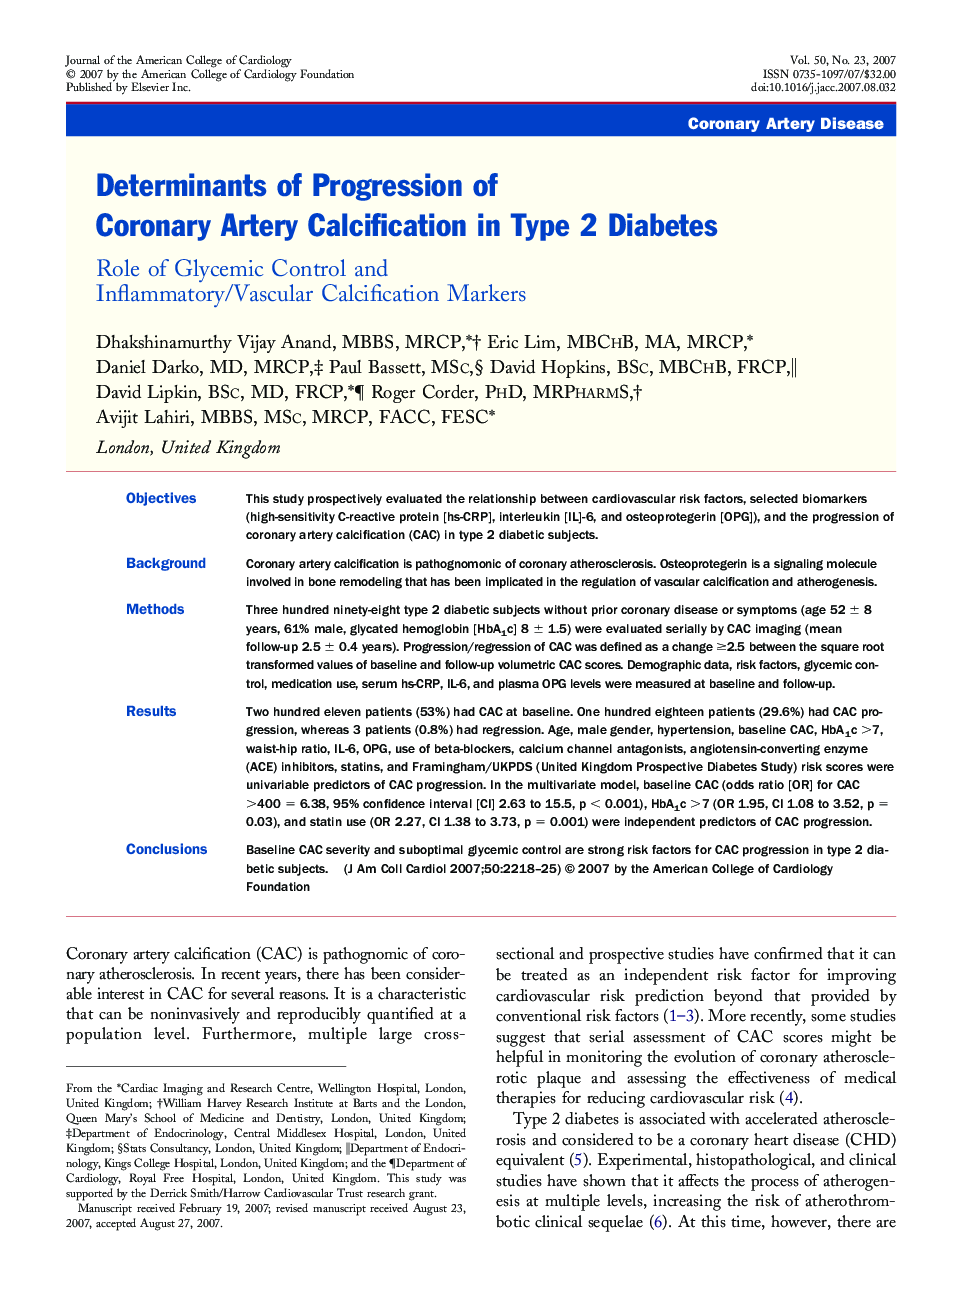 Determinants of Progression of Coronary Artery Calcification in Type 2 Diabetes : Role of Glycemic Control and Inflammatory/Vascular Calcification Markers